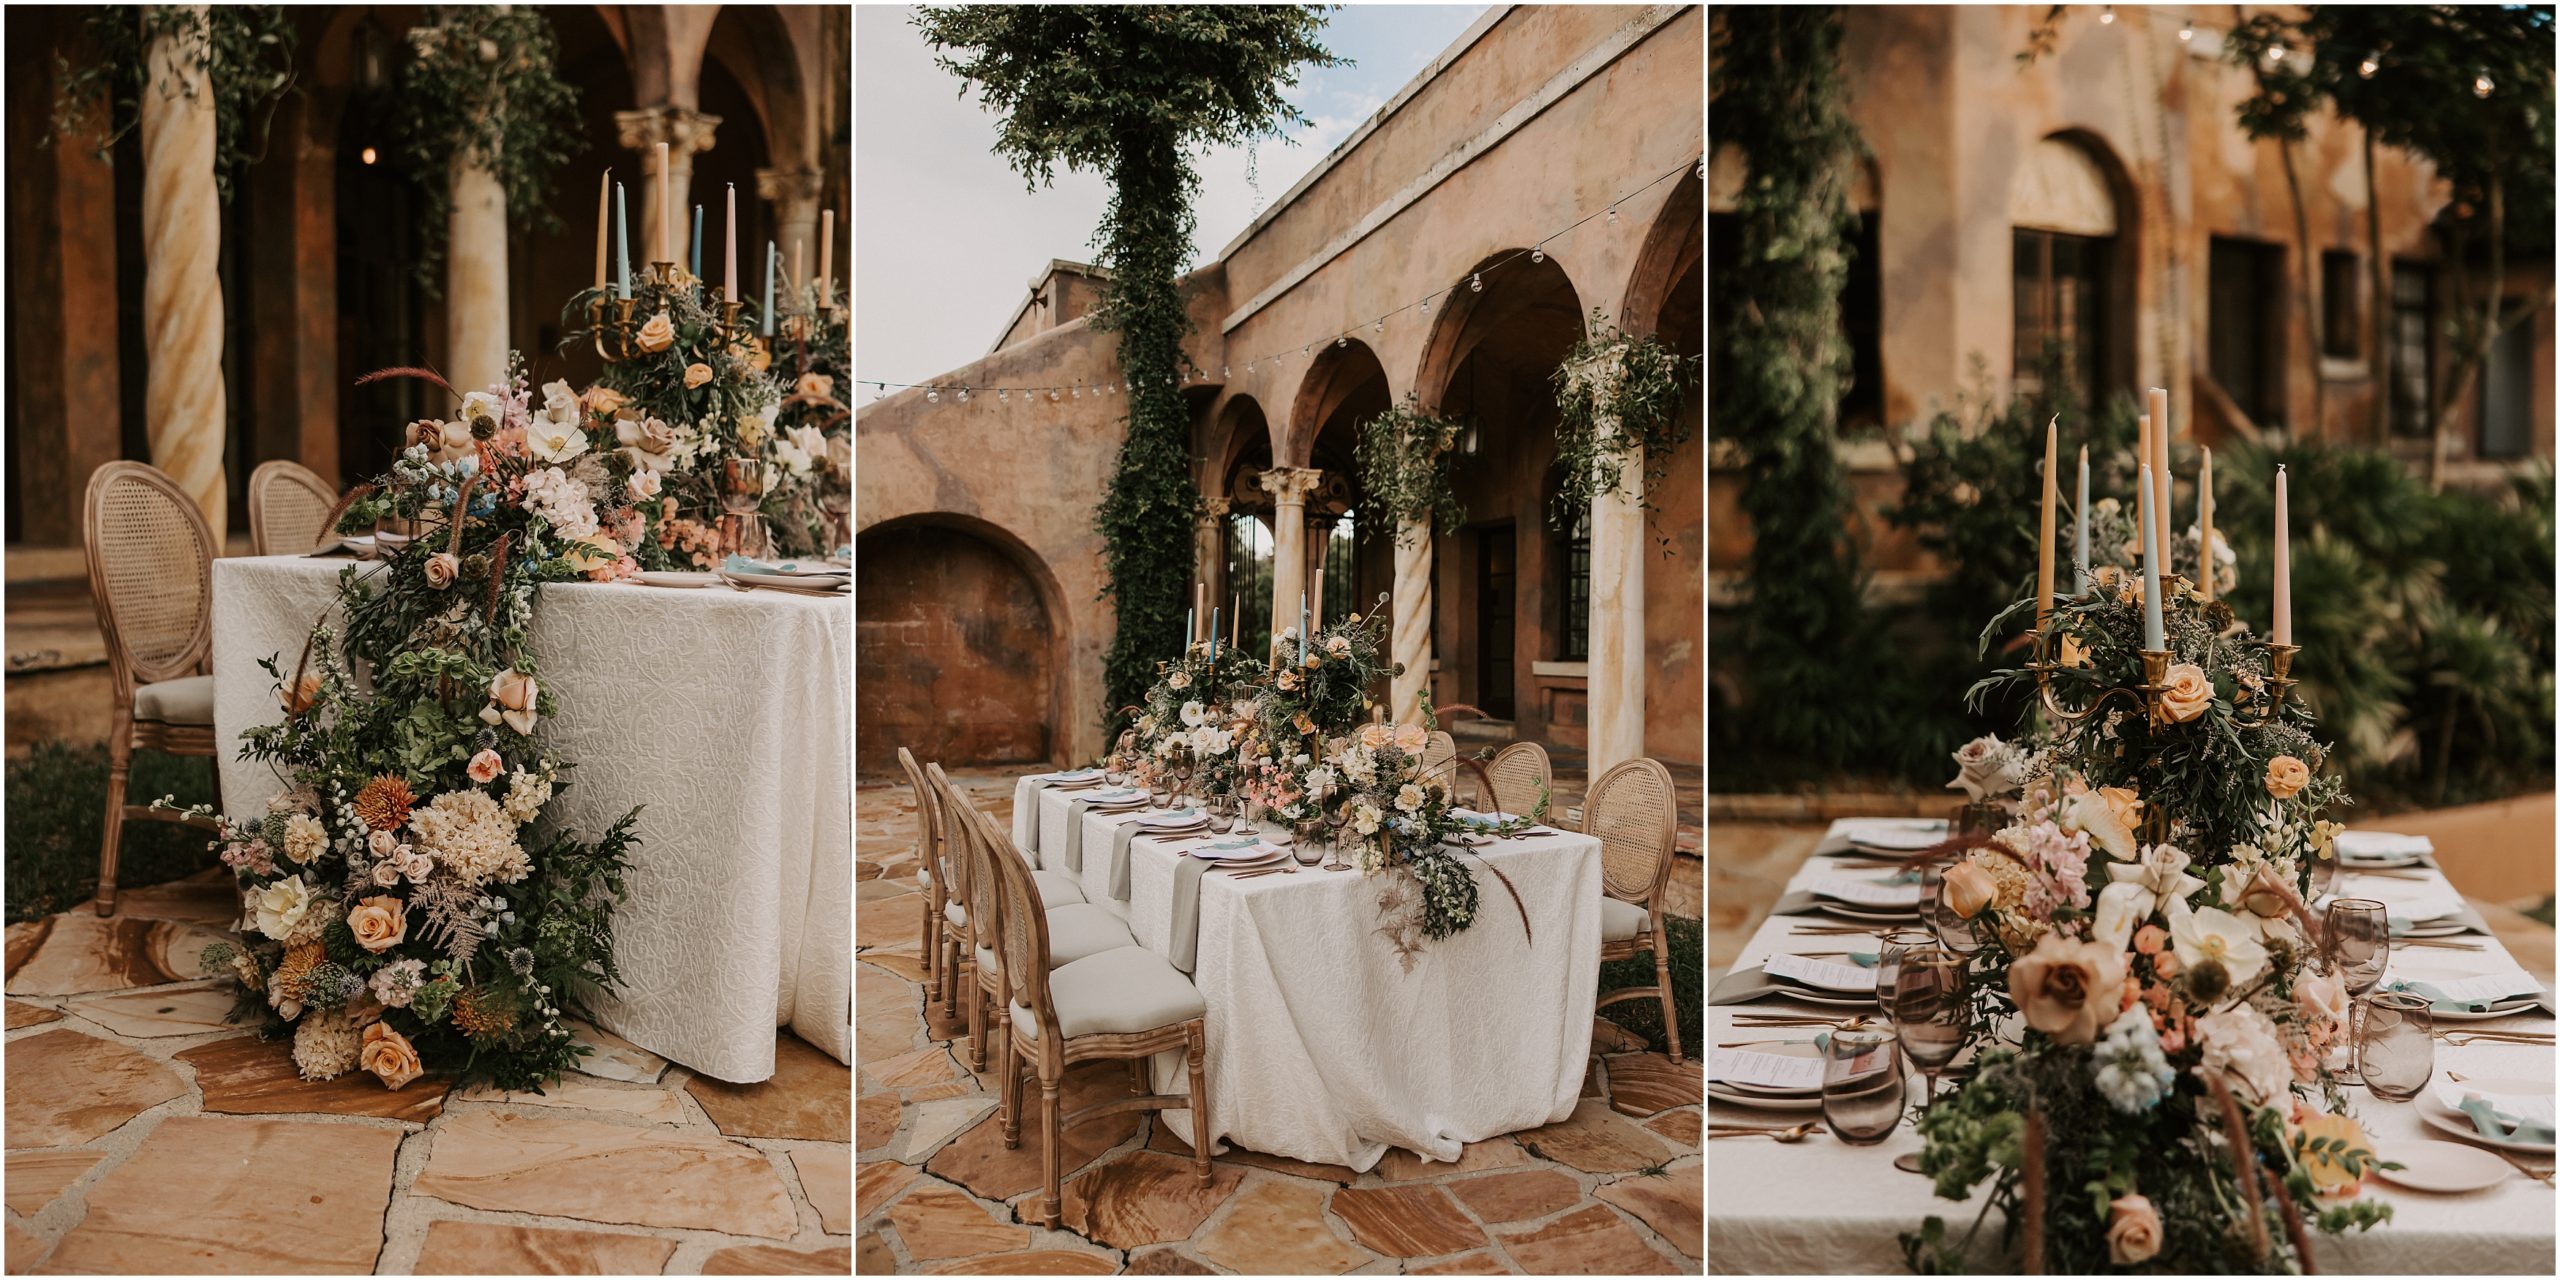 The unique and interesting cascading floral arrangement in muted rainbow hues combined with candles, tableware and smokey goblets creating a very romantic atmosphere in a wonderful setting like The Courtyard Stage in front of Pillars.